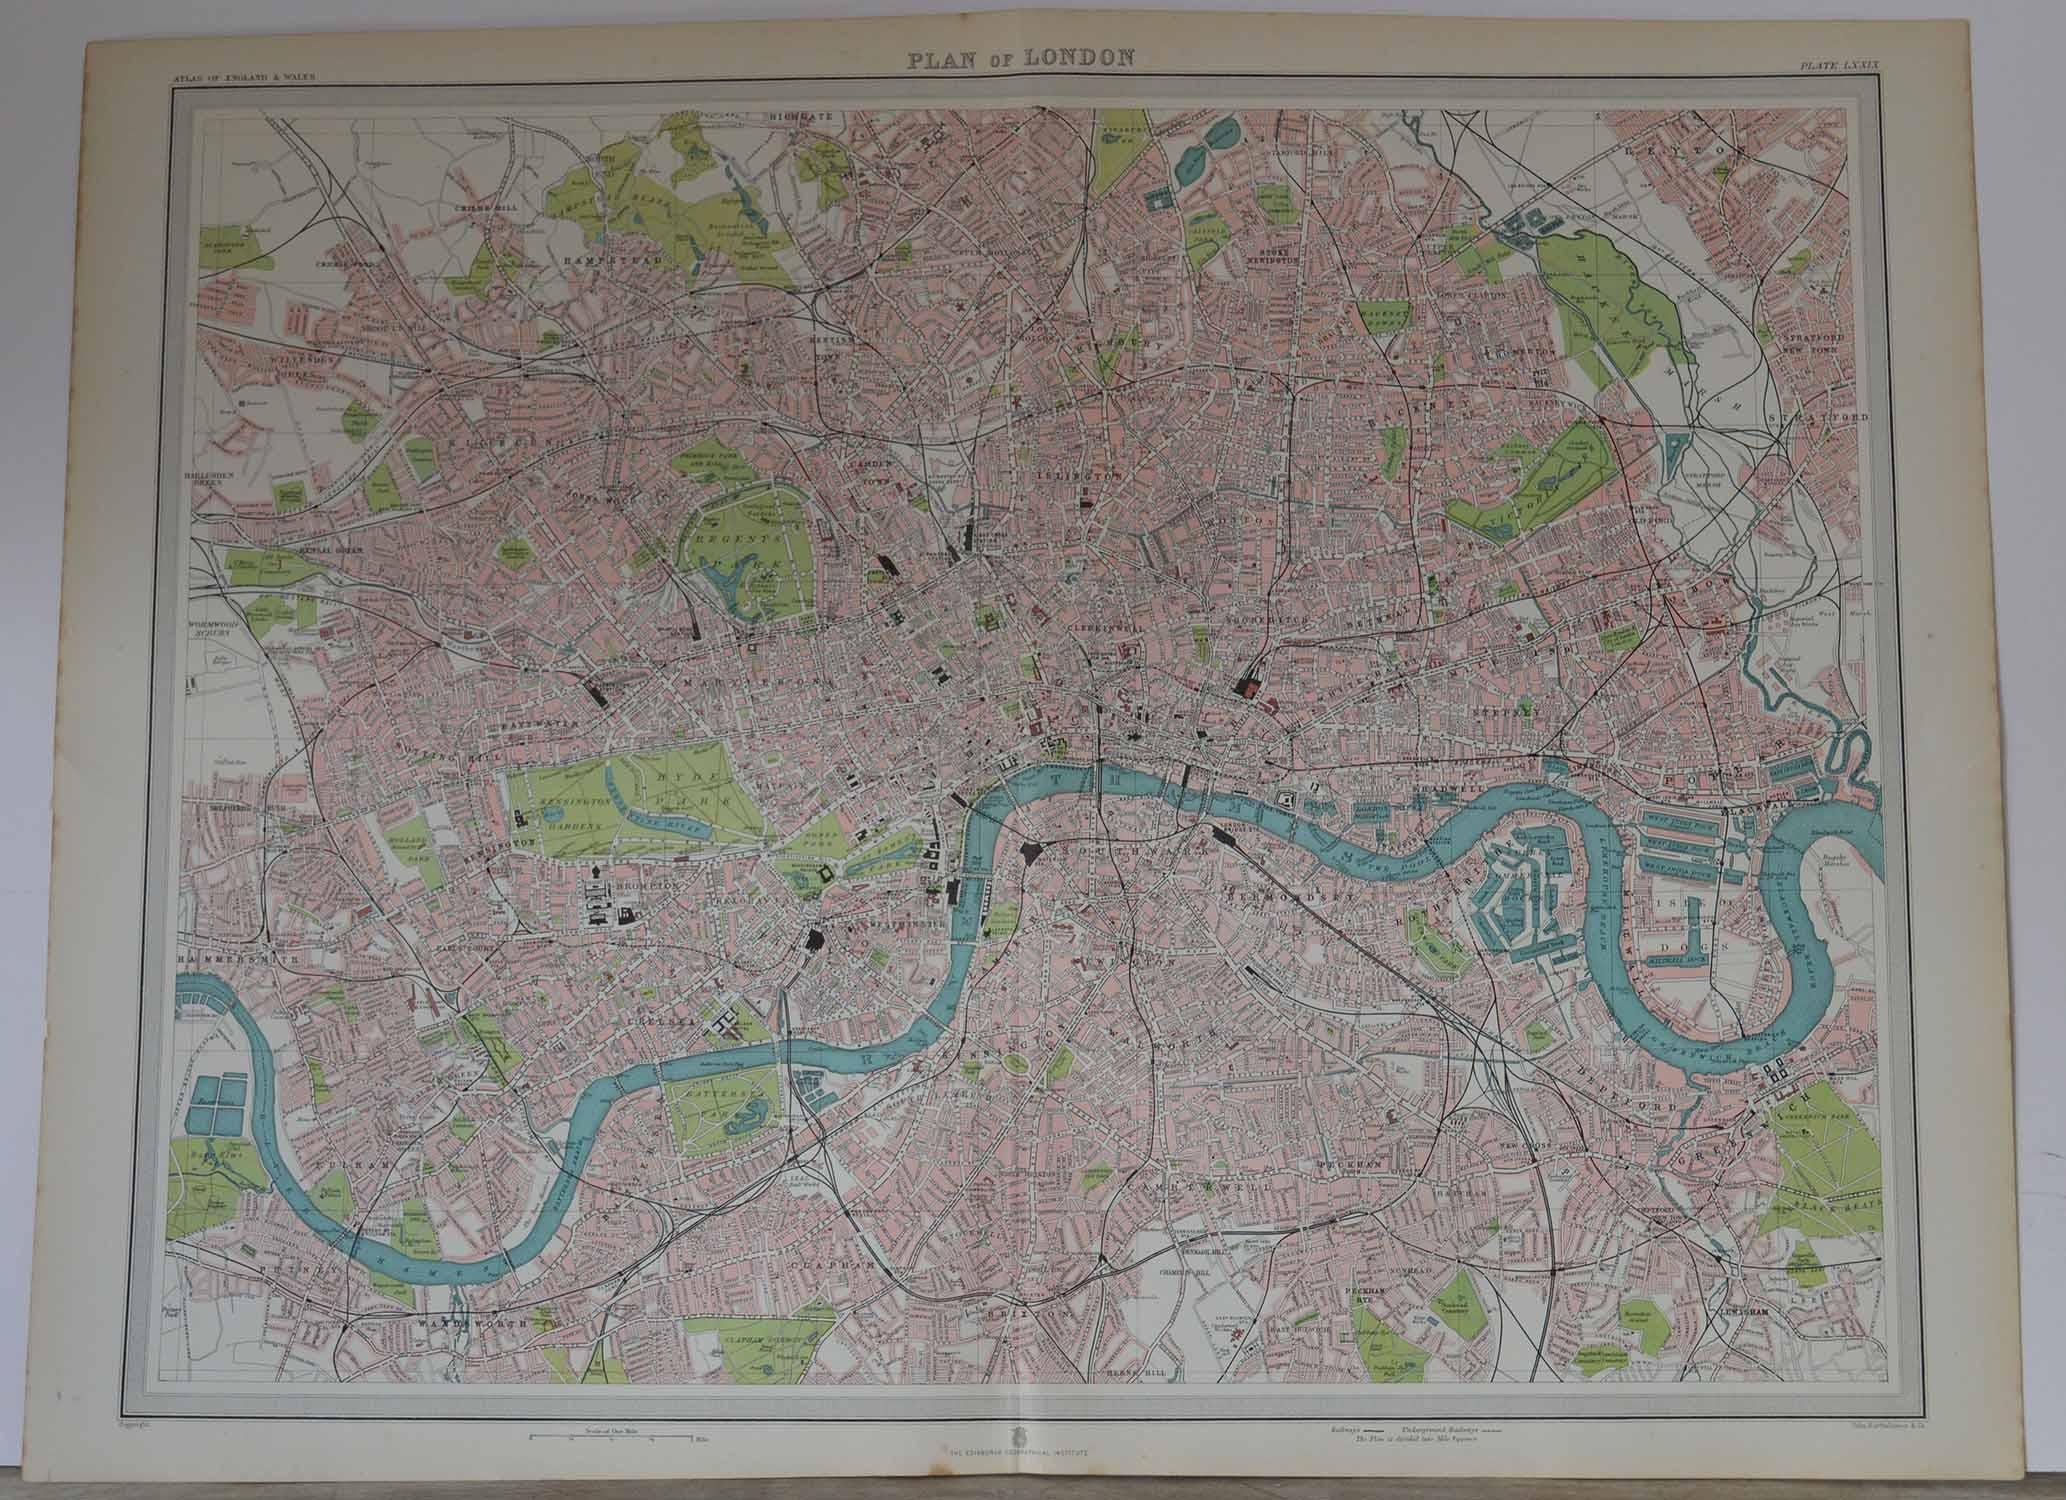 Great vintage map of London.

John Bartholomew and Co for the Edinburgh Geographical Institute, circa 1900

Lithograph. Original color

Unframed. 








  